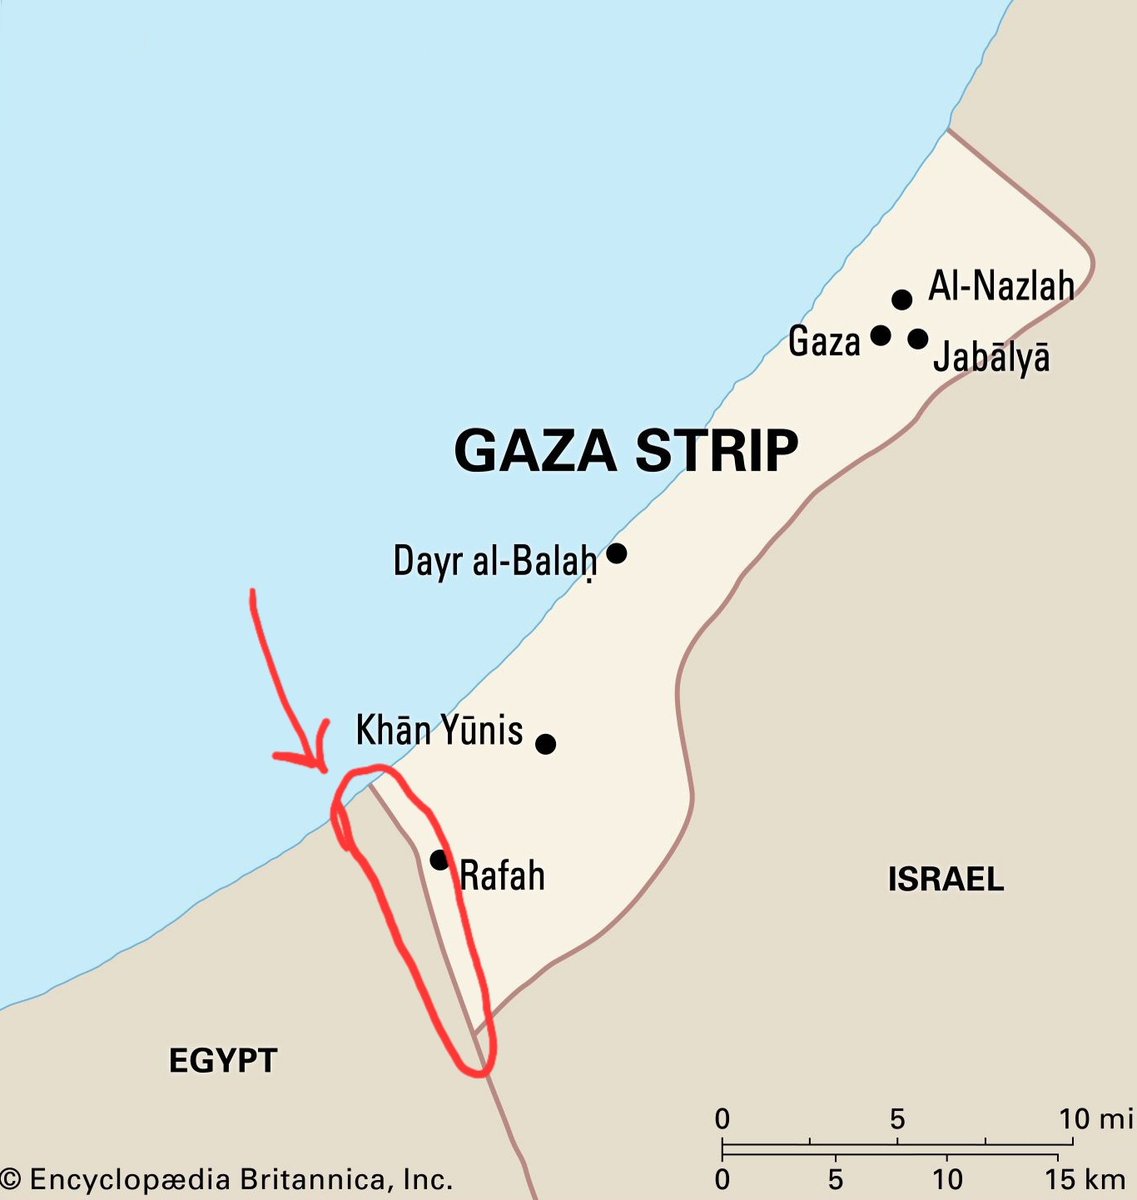 50 tunnels from Gaza to Egypt 🇪🇬 have been found so far. Some of them wide enough to drive a car through. All with full knowledge of Egypt, where its corrupt officers made millions facilitating Hamas' smuggling. Now we know why Egypt opposed Israeli operation in Rafah.